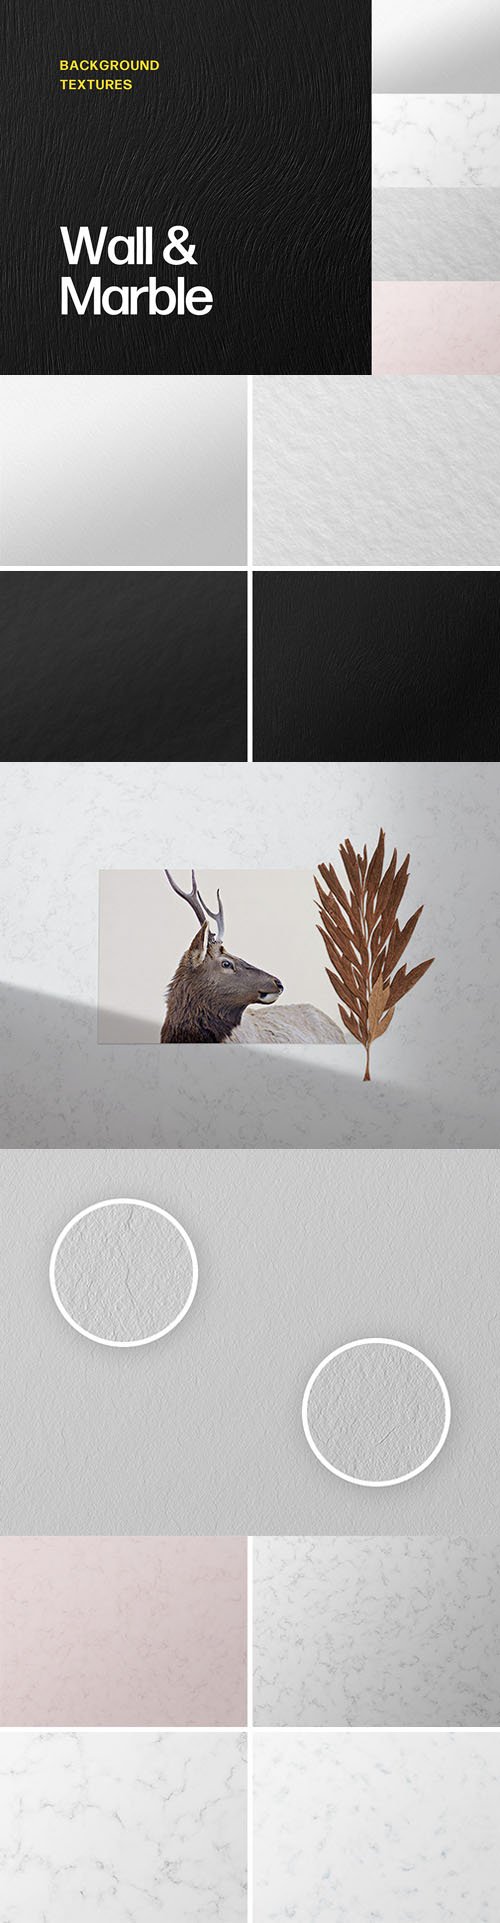 Wall & Marble Background Textures PSD Templates